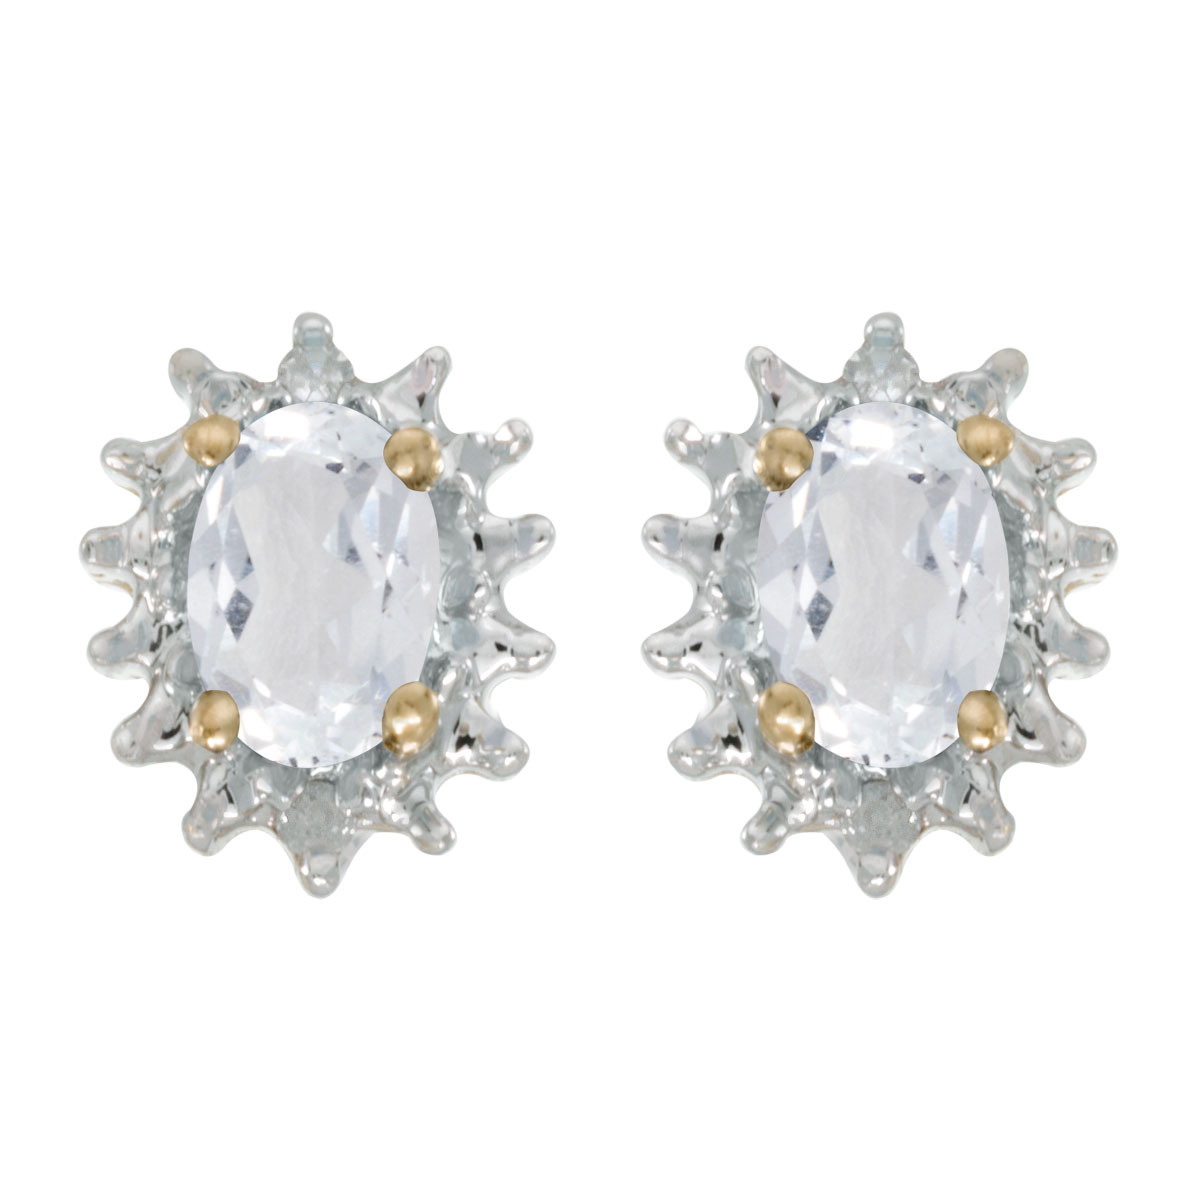 These 14k yellow gold oval white topaz and diamond earrings feature 6x4 mm genuine natural white topazs with a 0.96 ct total weight and .04 ct diamonds.